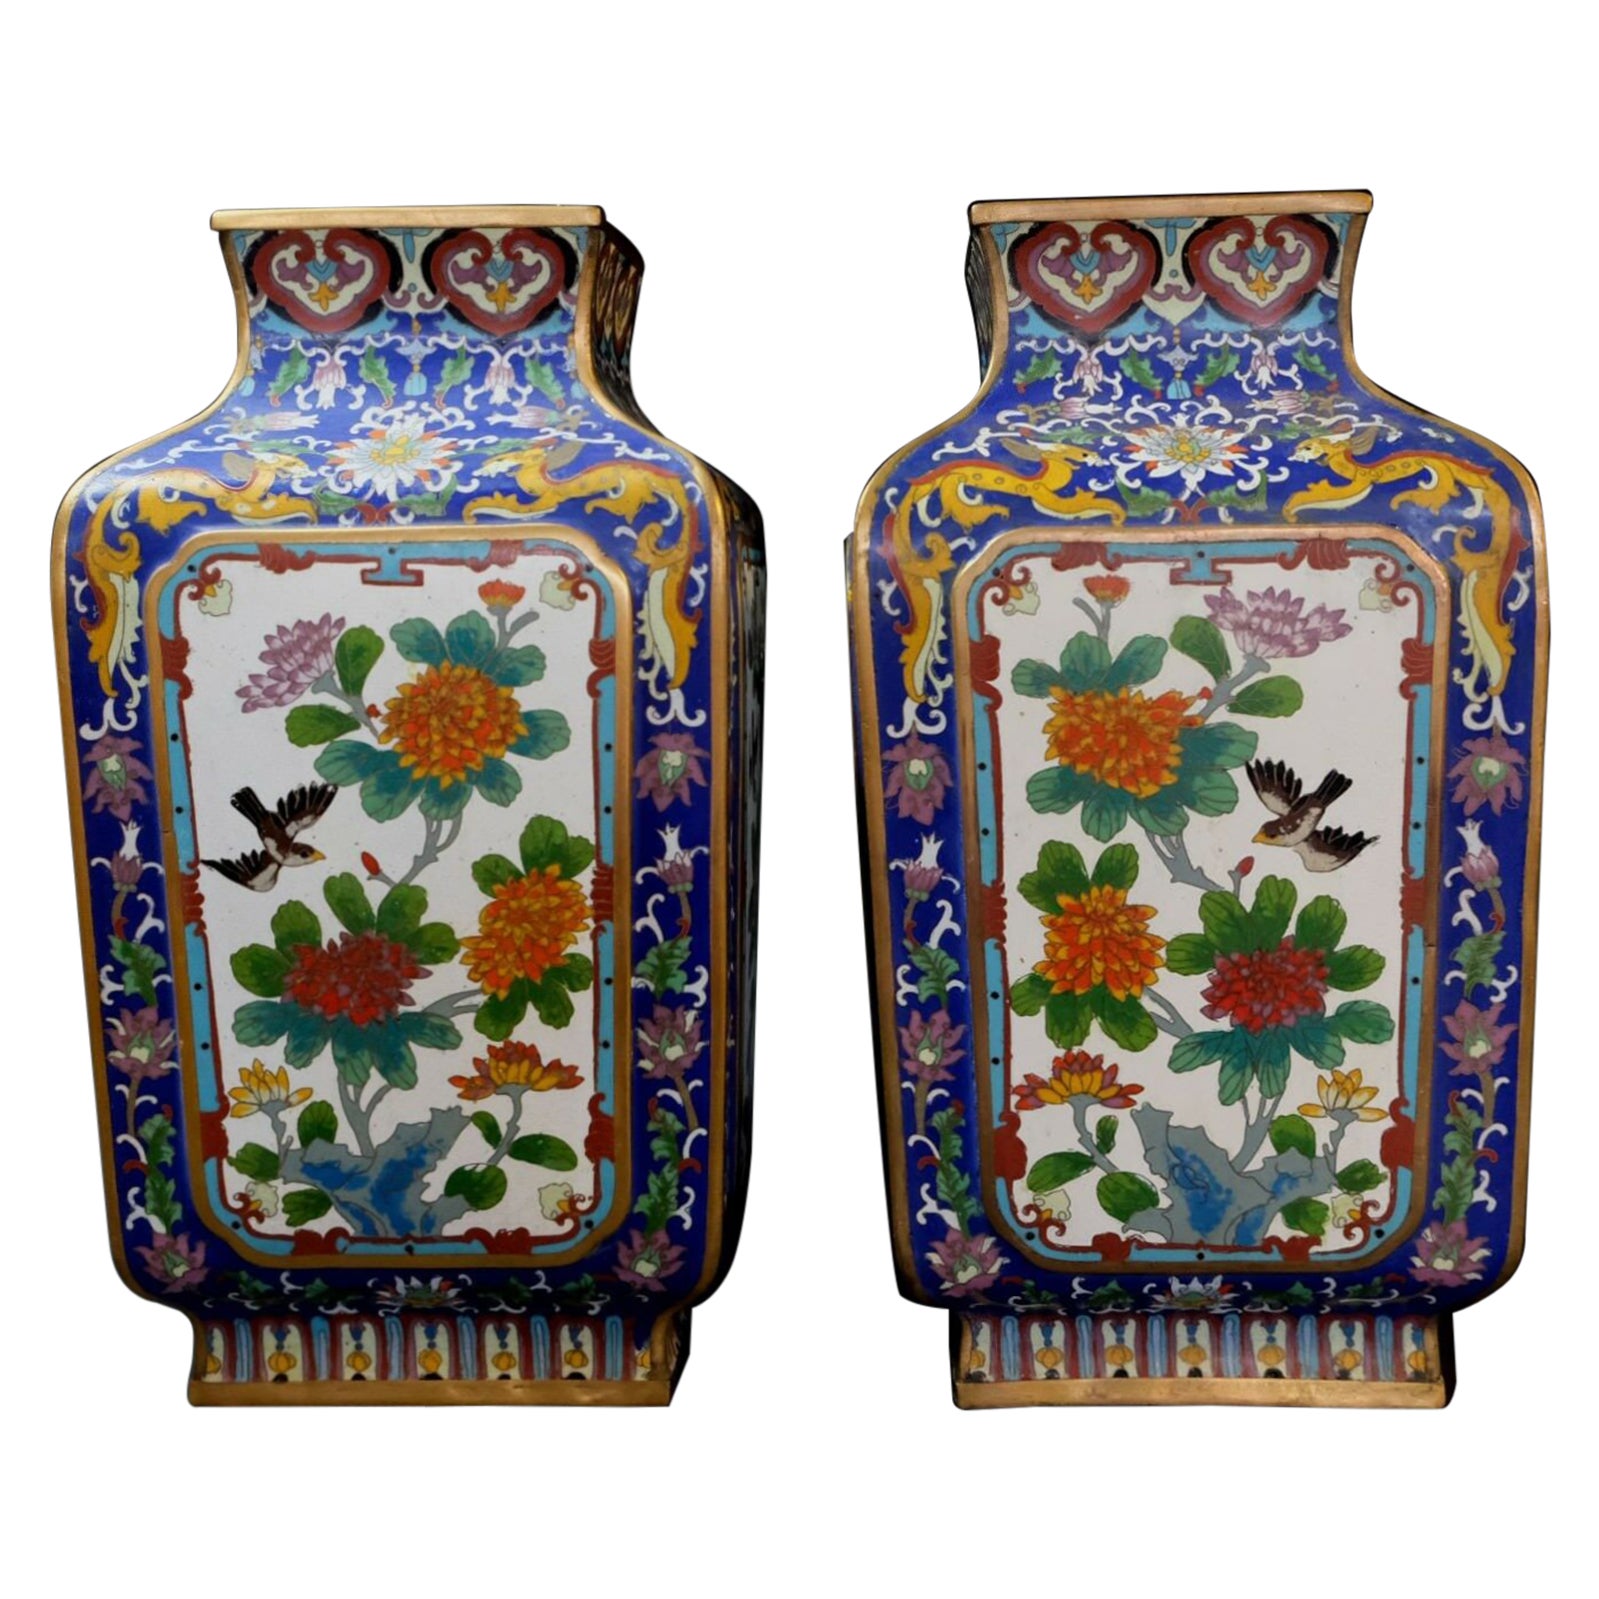 Large Matching Pair of Chinese Bronze Cloisonné Enameled Vases